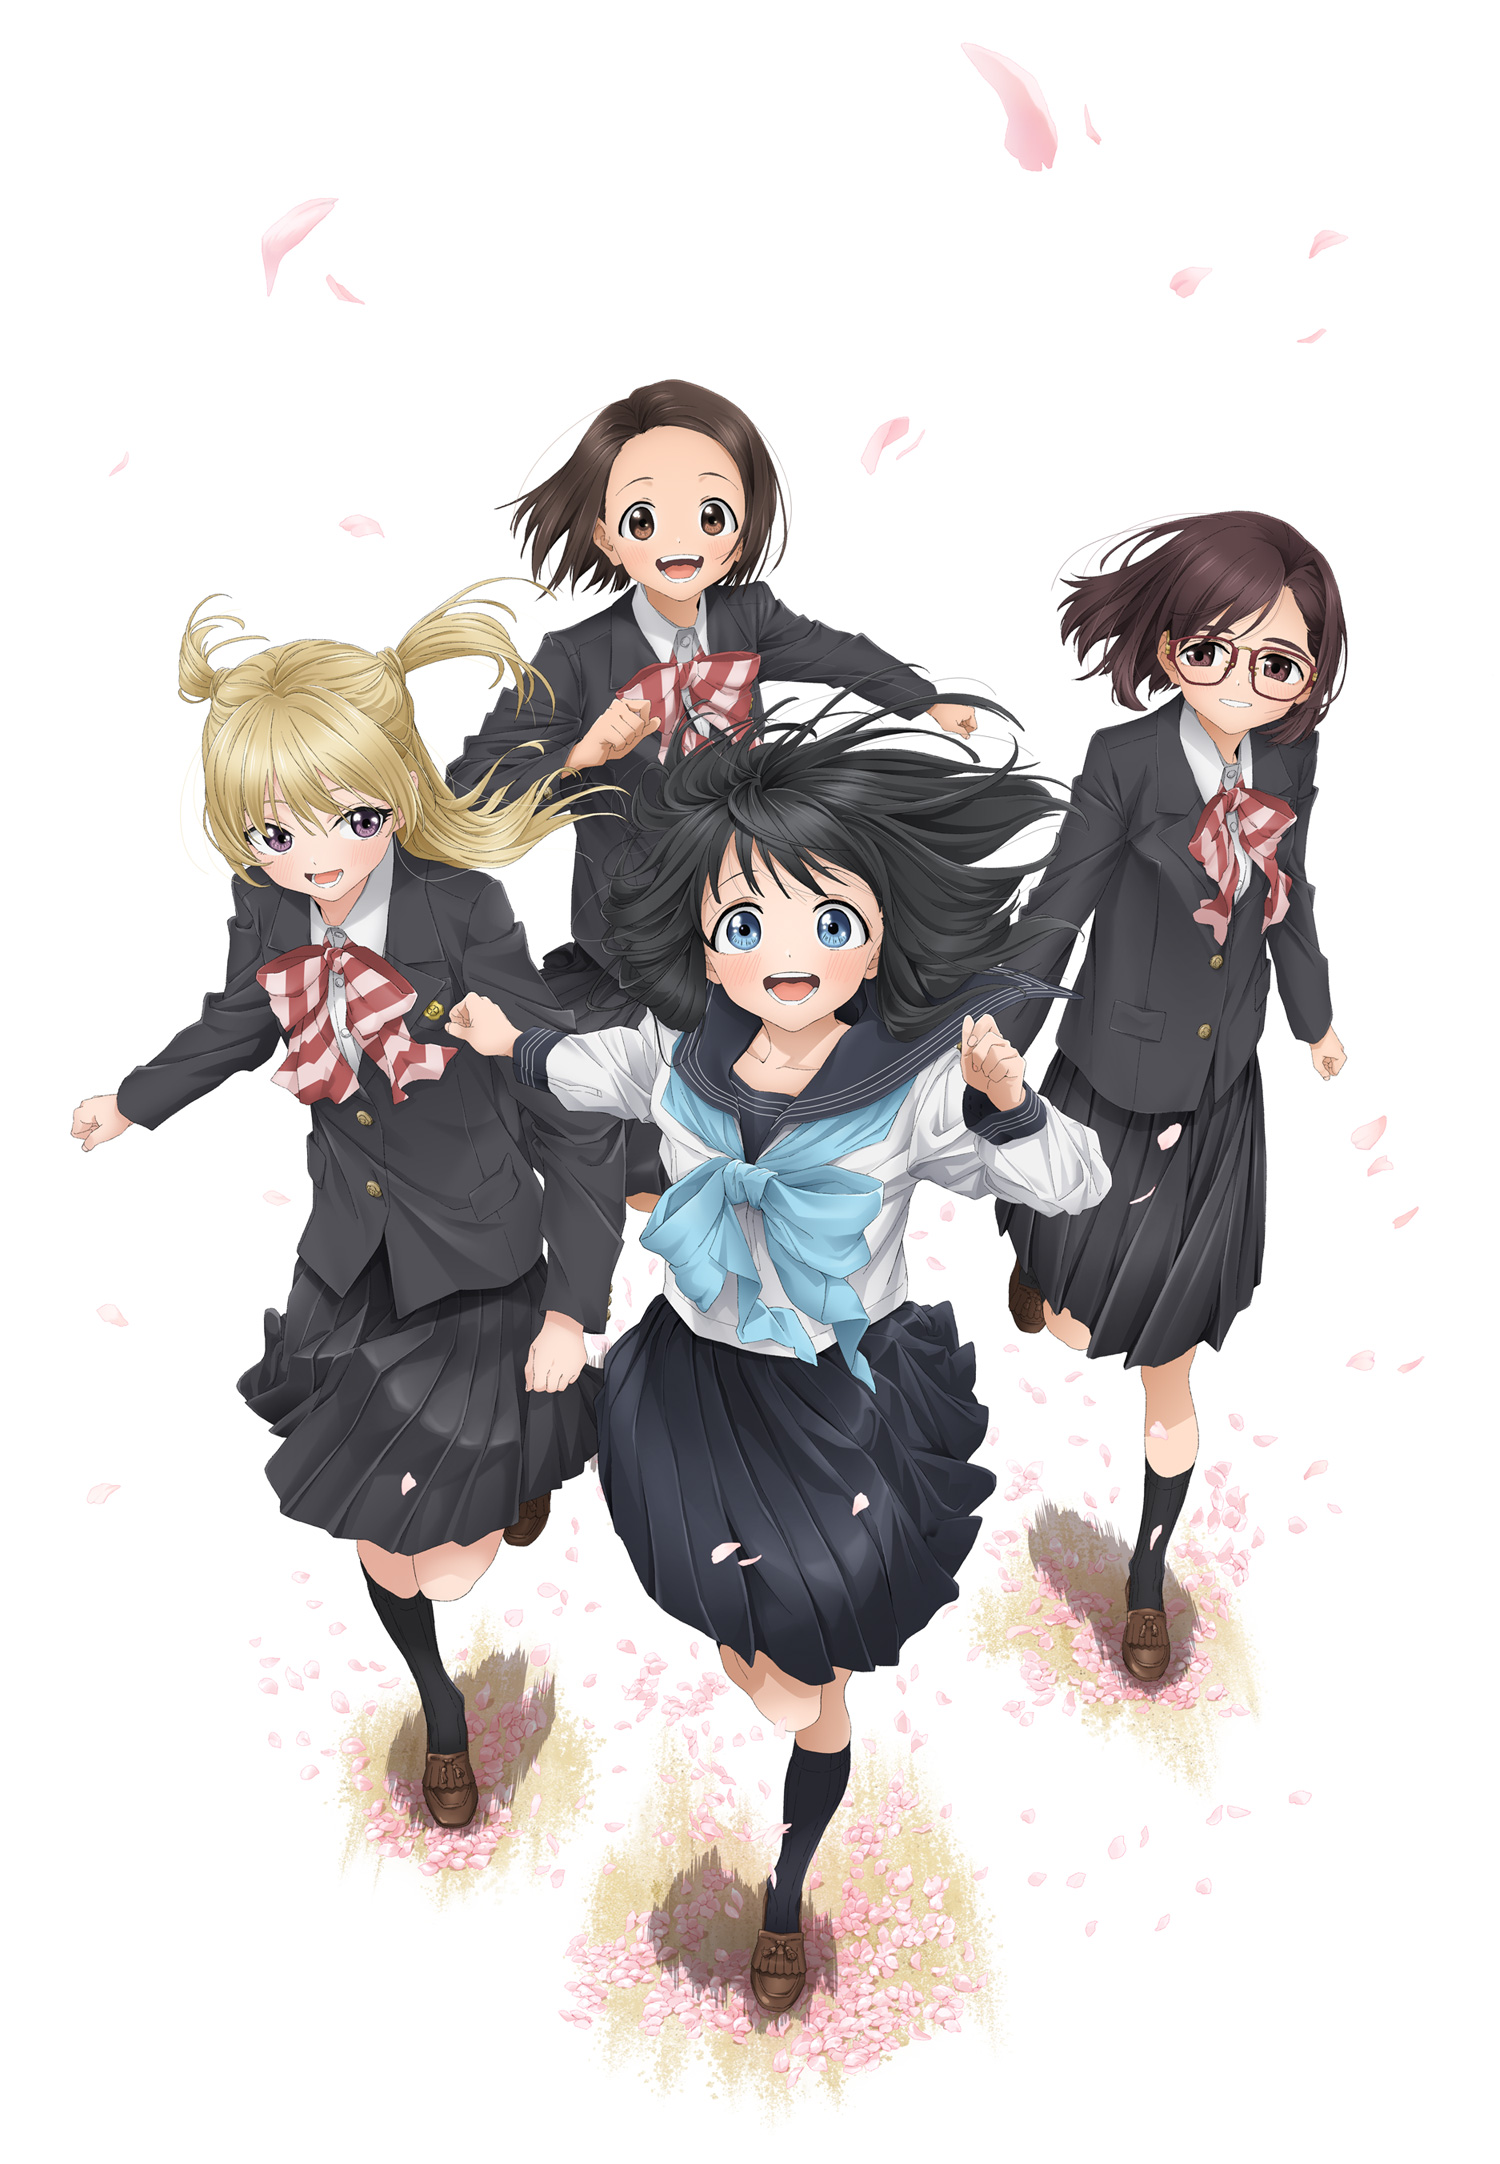 Characters appearing in Akebi's Sailor Uniform Anime | Anime-Planet